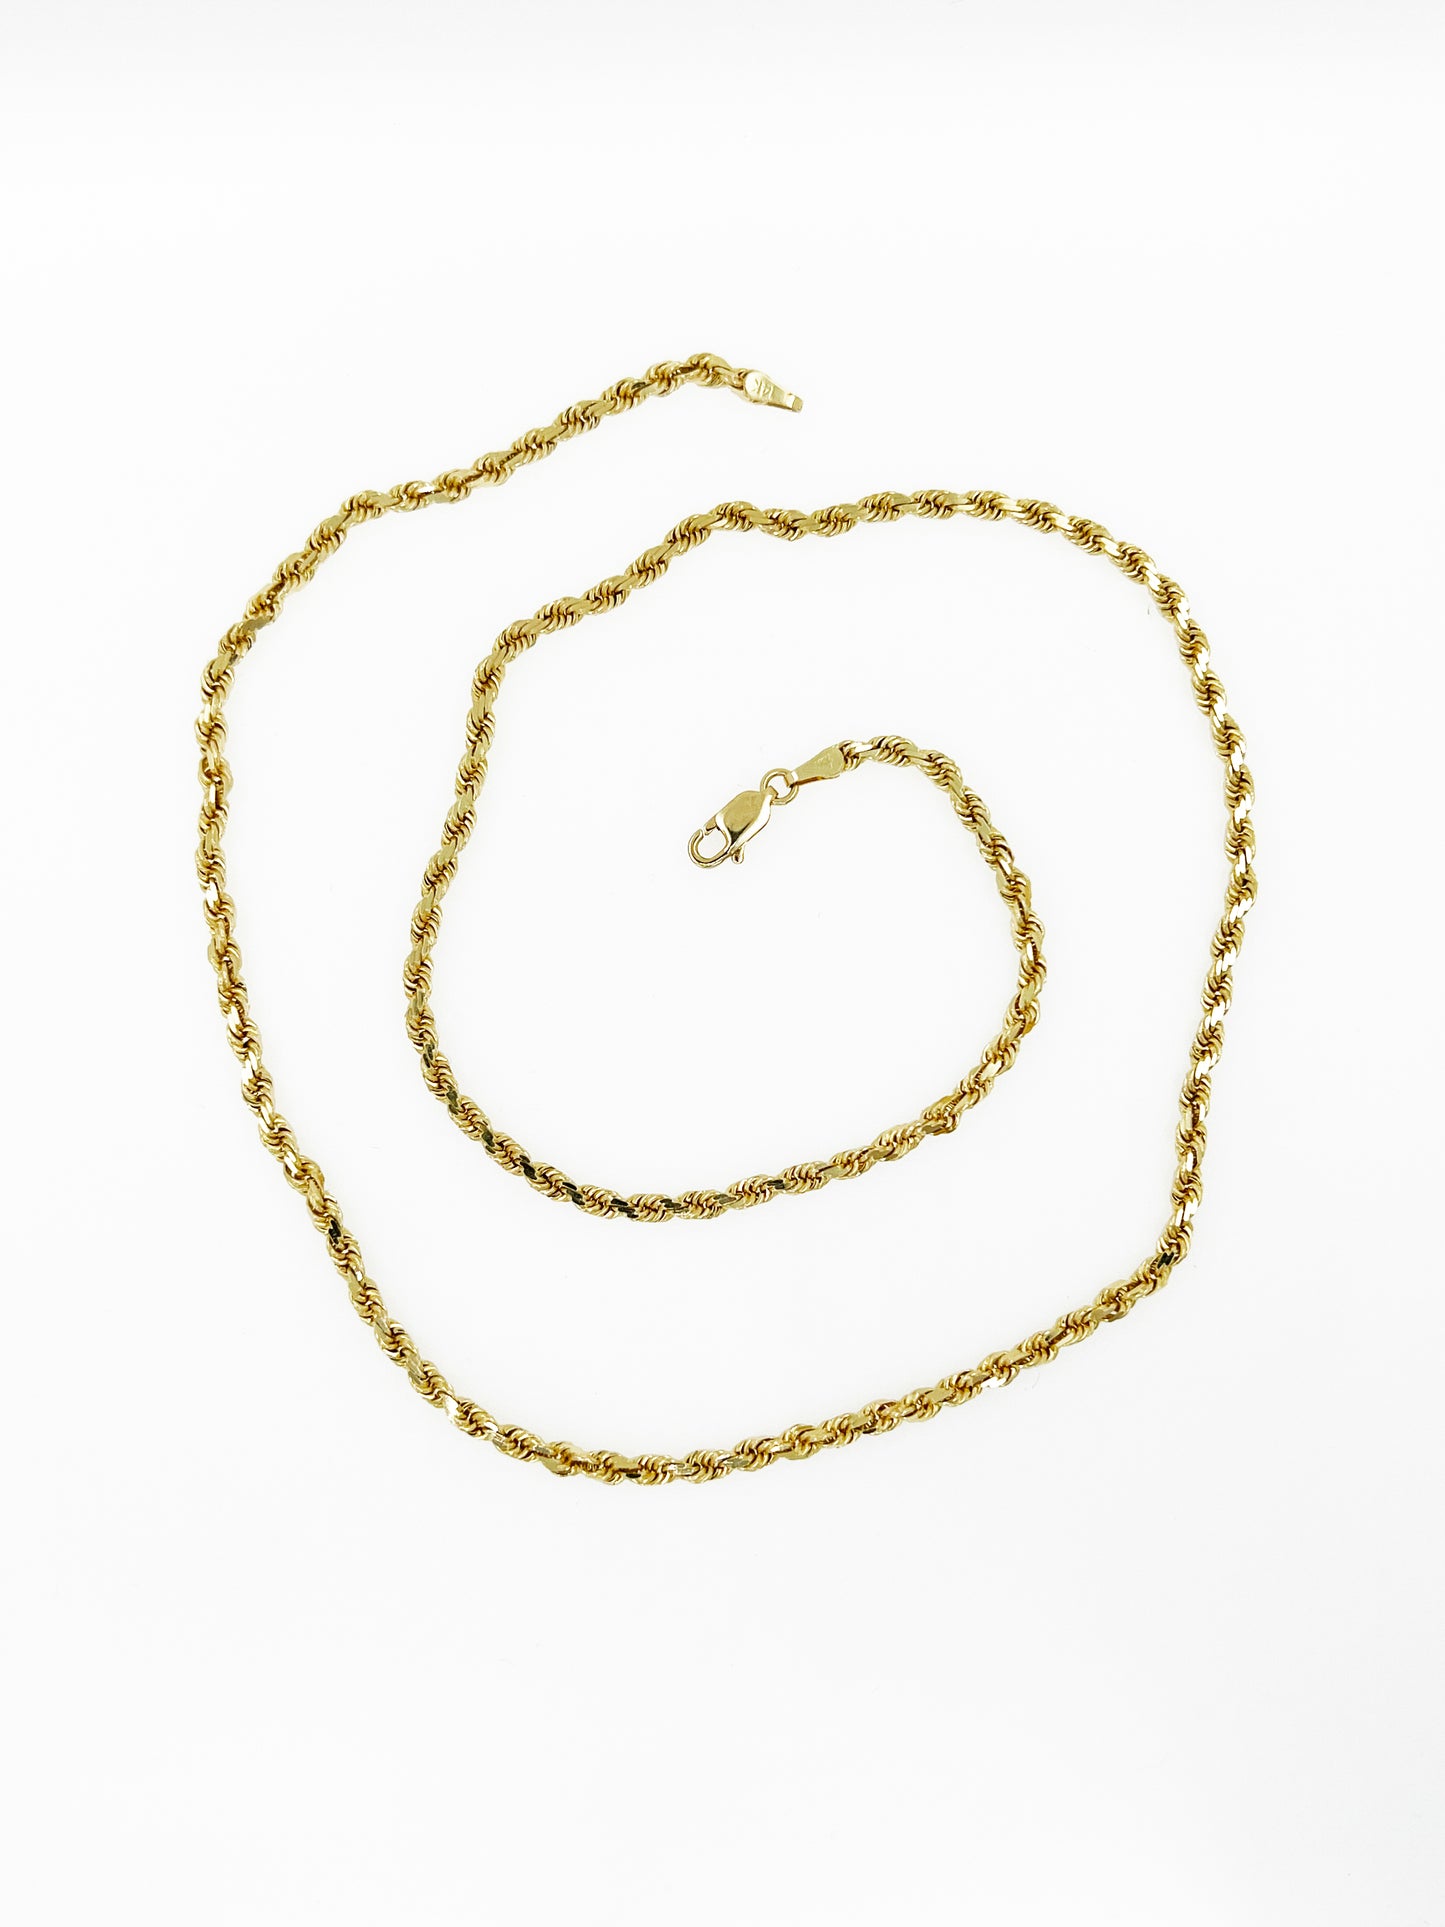 3mm Solid Rope Chain in 14k Yellow Gold (20")